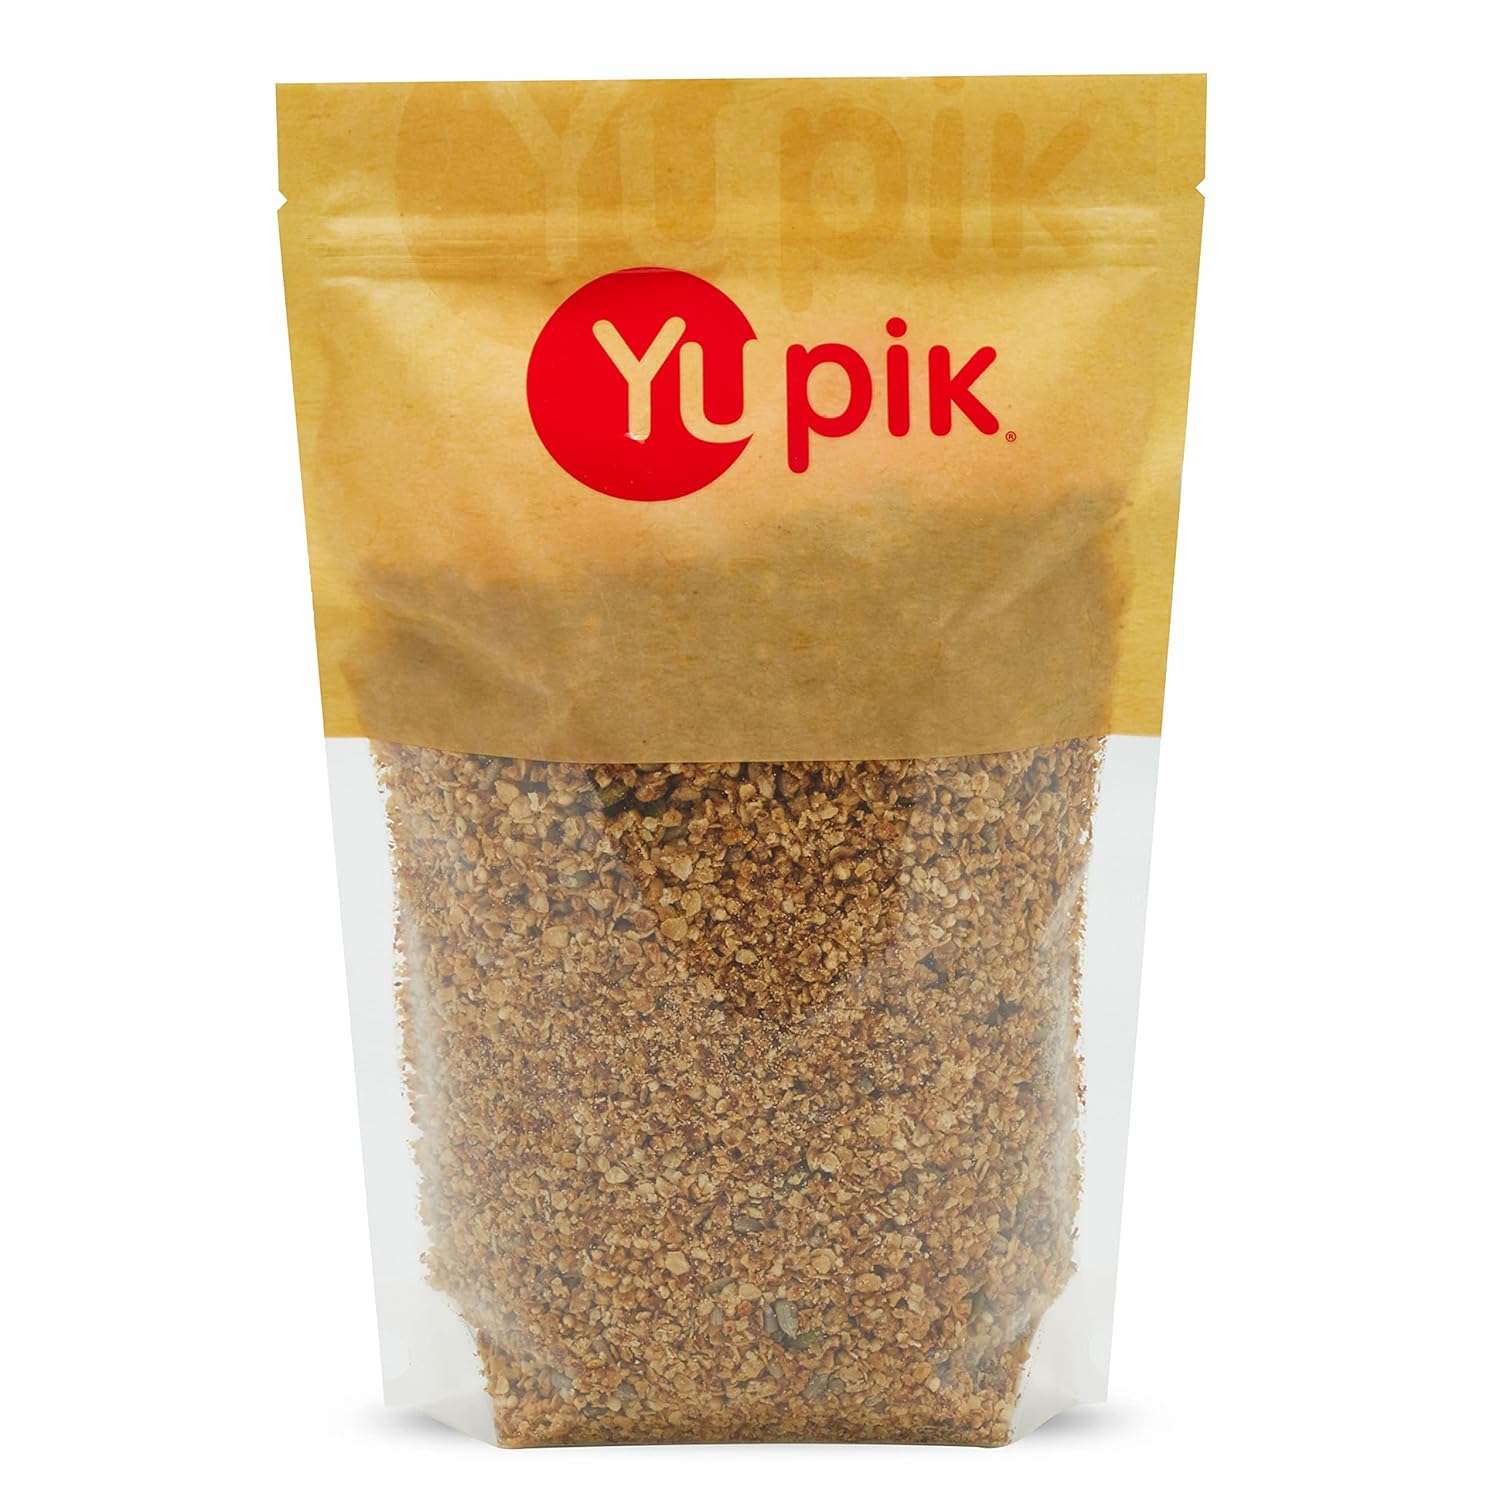 Yupik Granola Cereal, Ancient Grains, 2.2 lb, A granola mix of organic oats, organic agave syrup, sunflower seeds, pumpkin seeds, puffed amaranth seeds, and flax meal, Pack of 1